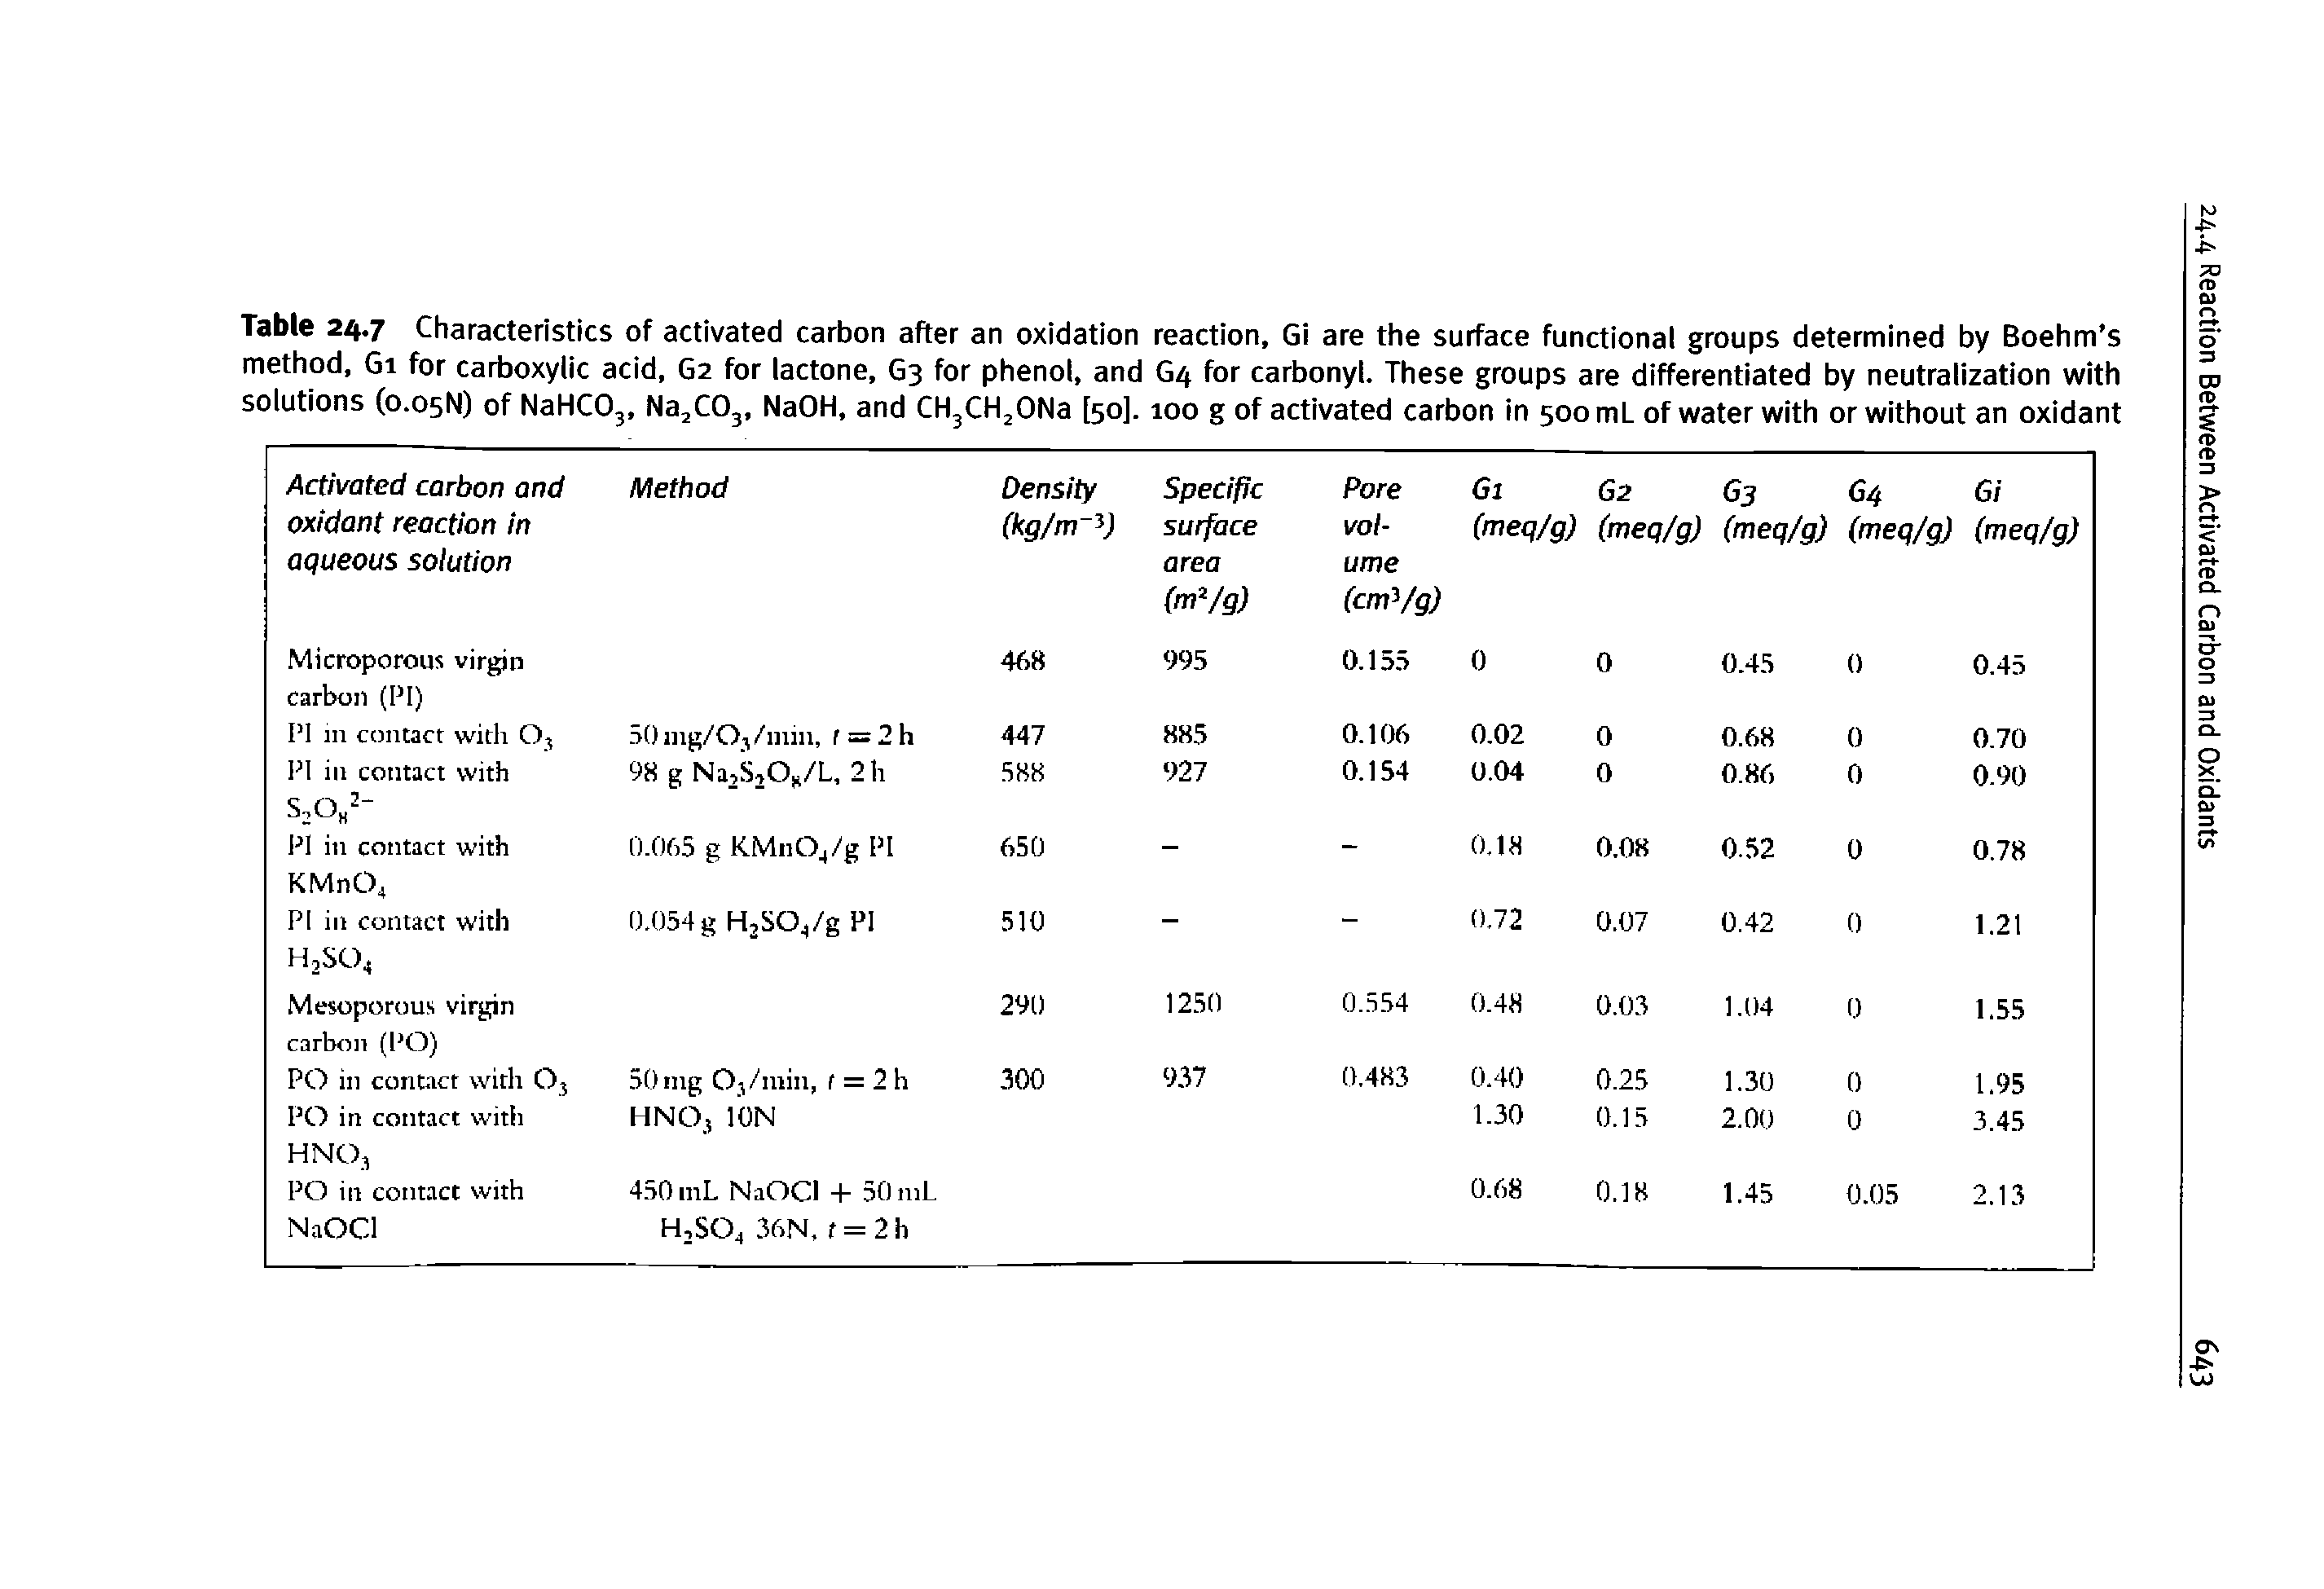 Table 24.7 Characteristics of activated carbon after an oxidation reaction, Gi are the surface functional groups determined by Boehm s method, Gi for carboxylic acid, G2 for lactone, G3 for phenol, and G4 for carbonyl. These groups are differentiated by neutralization with solutions (0.05N) of NaHCOj, Na COj, NaOH, and CH CH ONa [50]. 100 g of activated carbon in 500 ml of water with or without an oxidant...